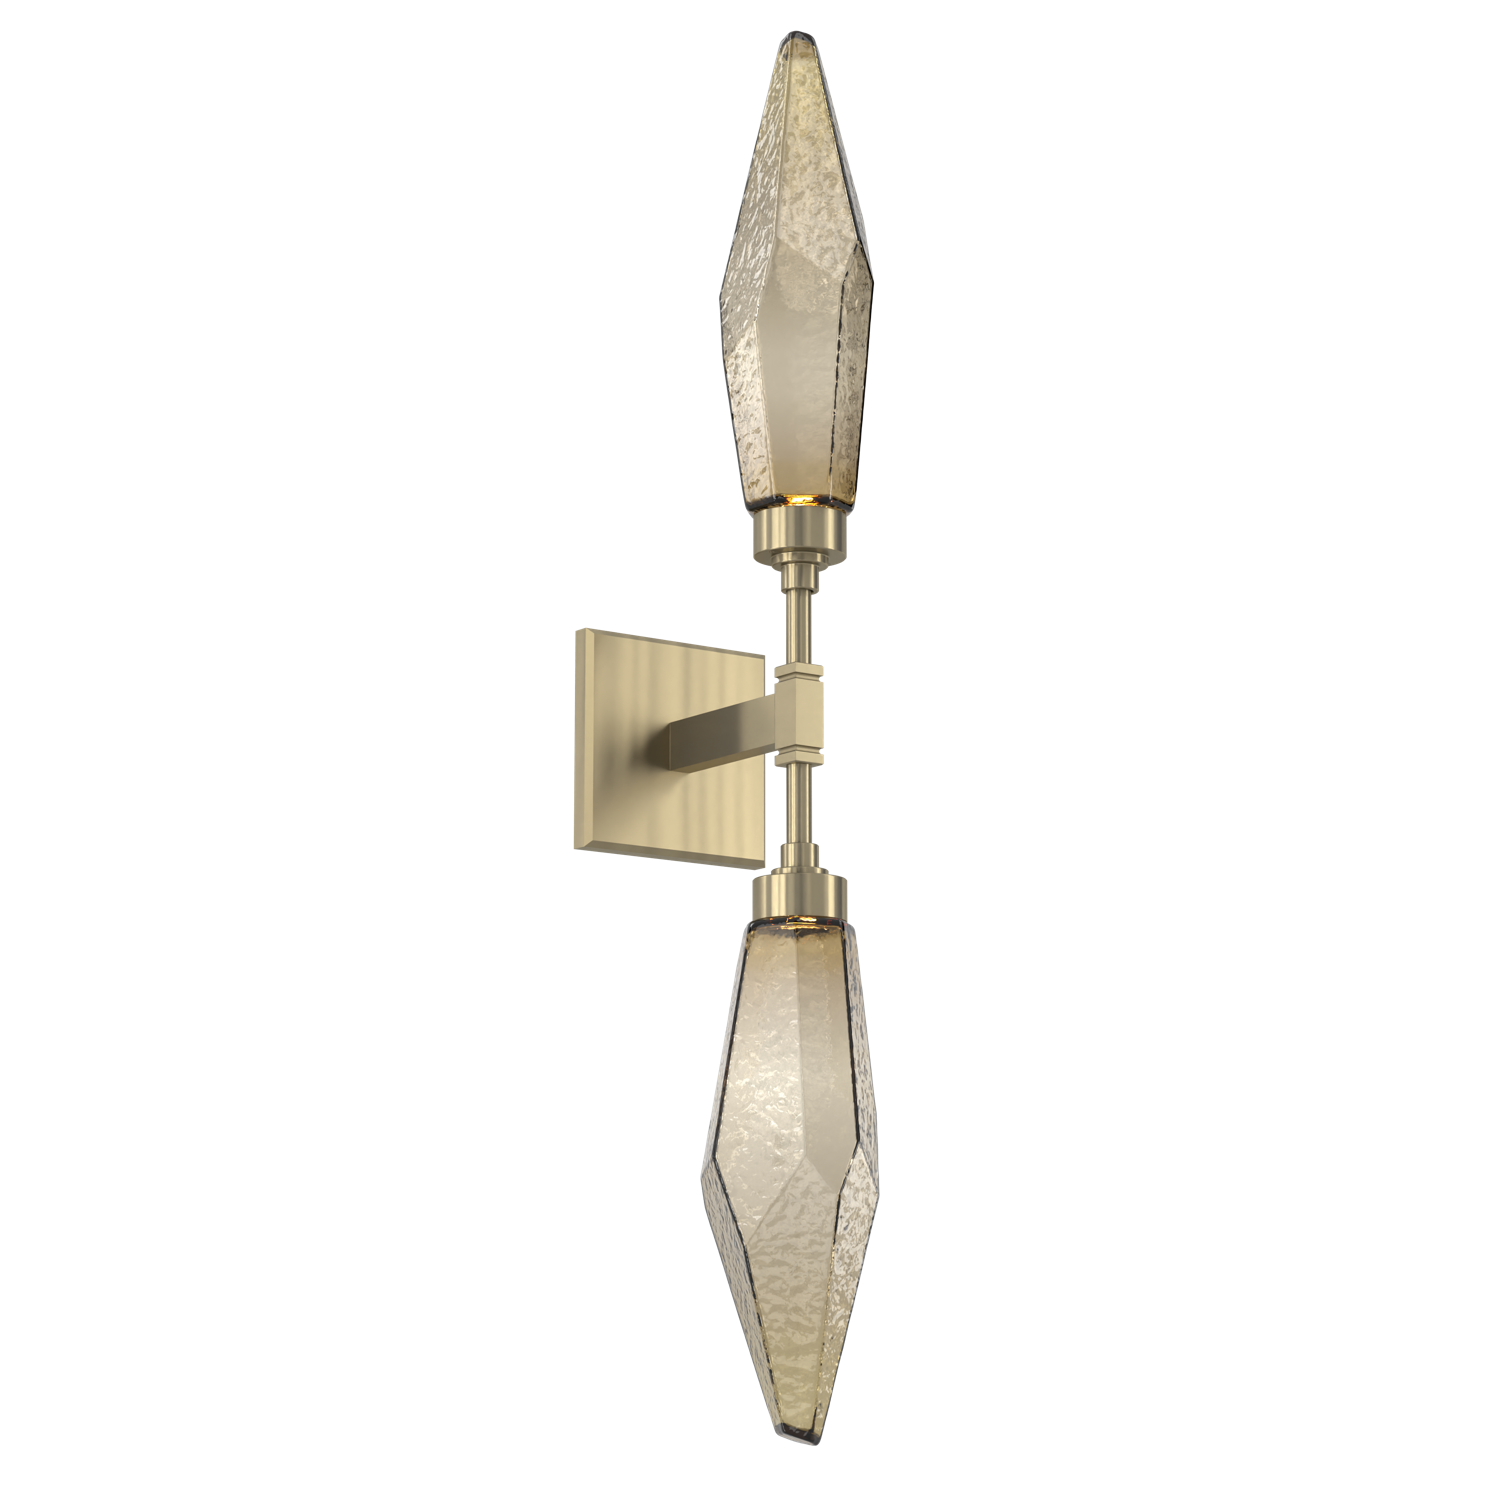 IDB0050-02-HB-CB-Hammerton-Studio-Rock-Crystal-wall-sconce-with-heritage-brass-finish-and-chilled-bronze-blown-glass-shades-and-LED-lamping